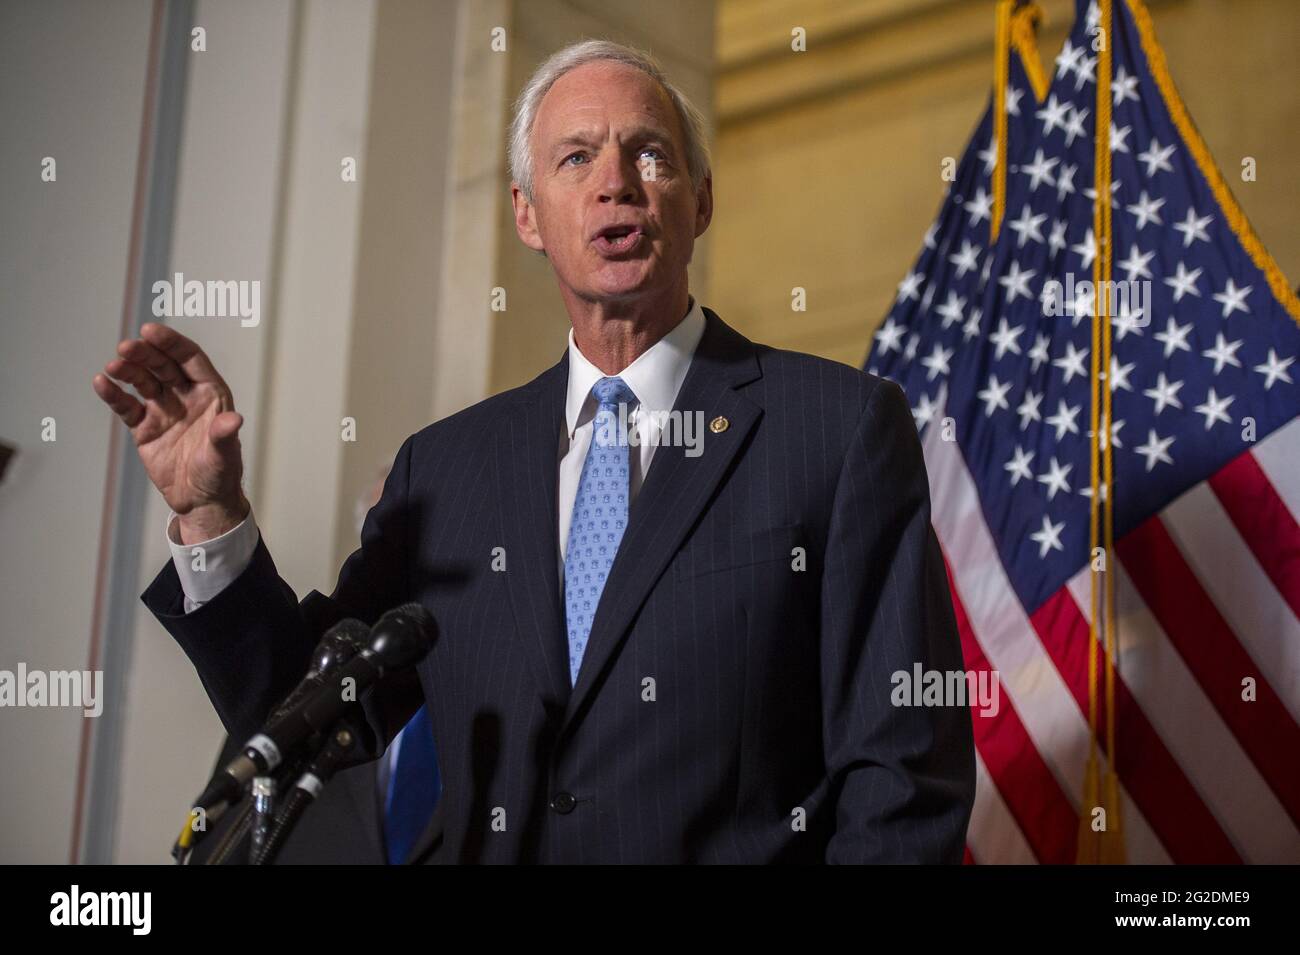 Washington, United States. 10th June, 2021. Senator Ron Johnson, R-WI, speaks during a news conference in the US Capitol in Washington, DC., on Wednesday, June 10, 2021. The conference, held by Senate republicans, discussed Big Tech and coronavirus censorship. Photo by Bonnie Cash/UPI. Credit: UPI/Alamy Live News Stock Photo